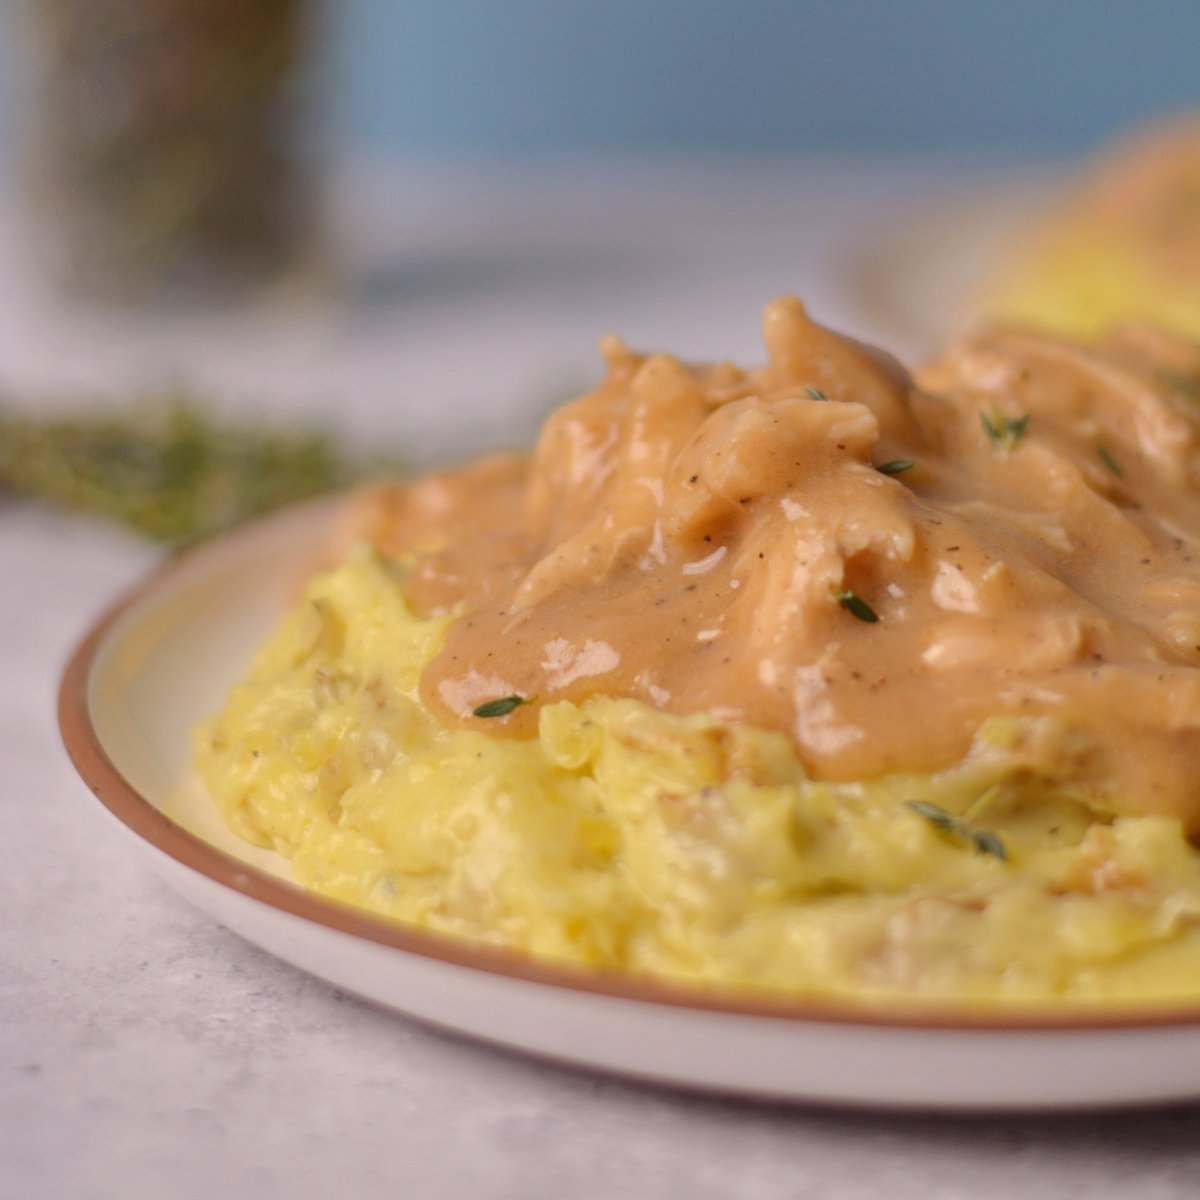 Mashed potatoes on a plate with chicken and gravy on top and thyme in the background.